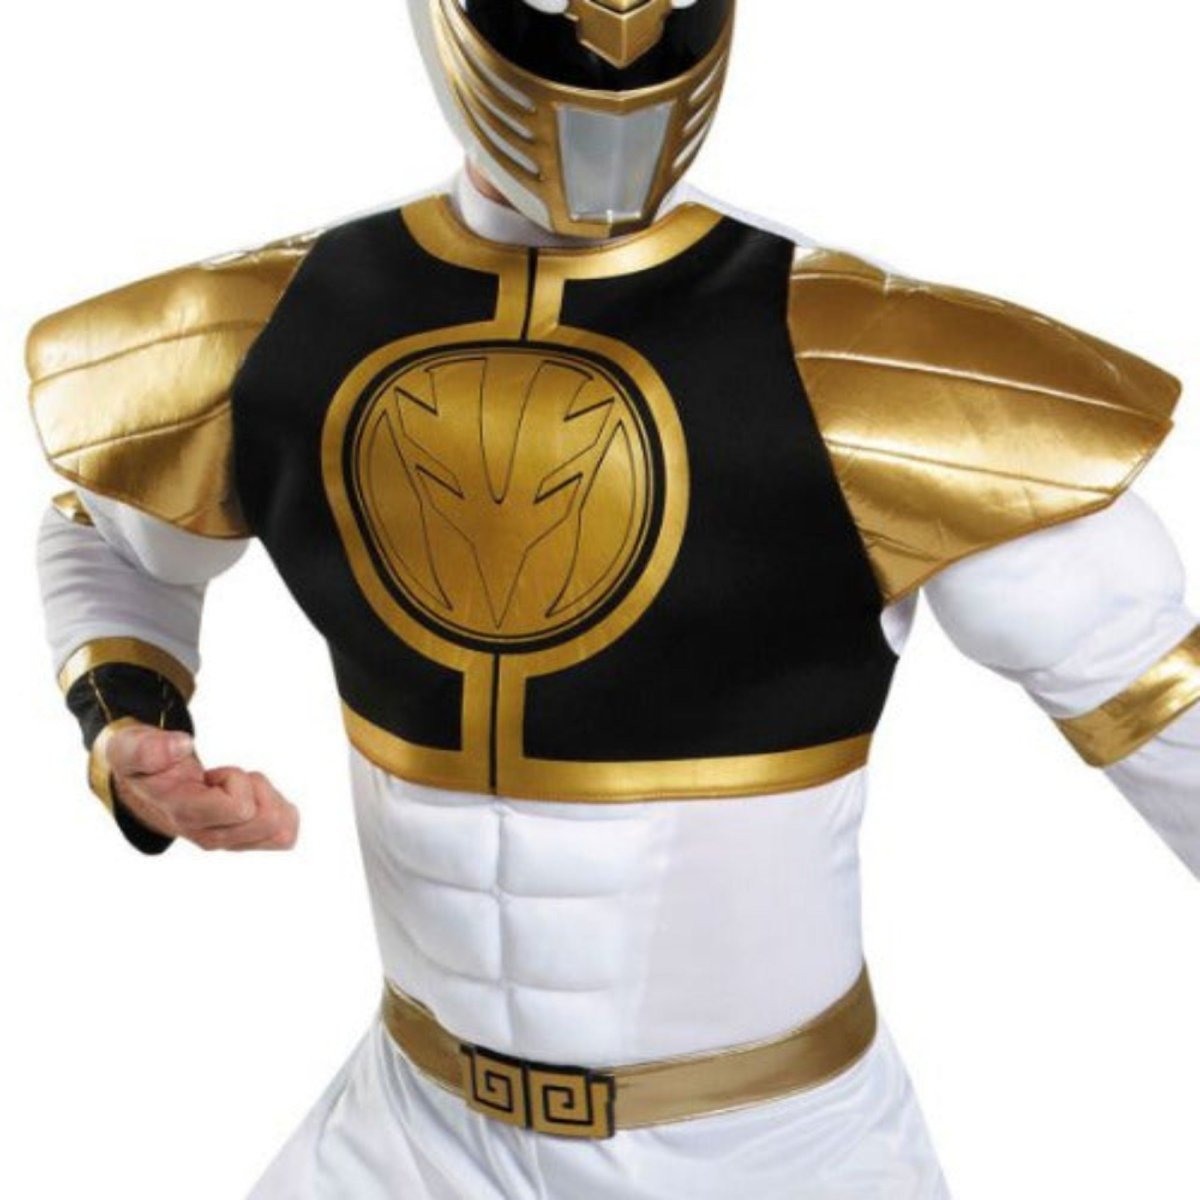 Disguise Men's White Ranger Classic Muscle Adult Costume - worldclasscostumes